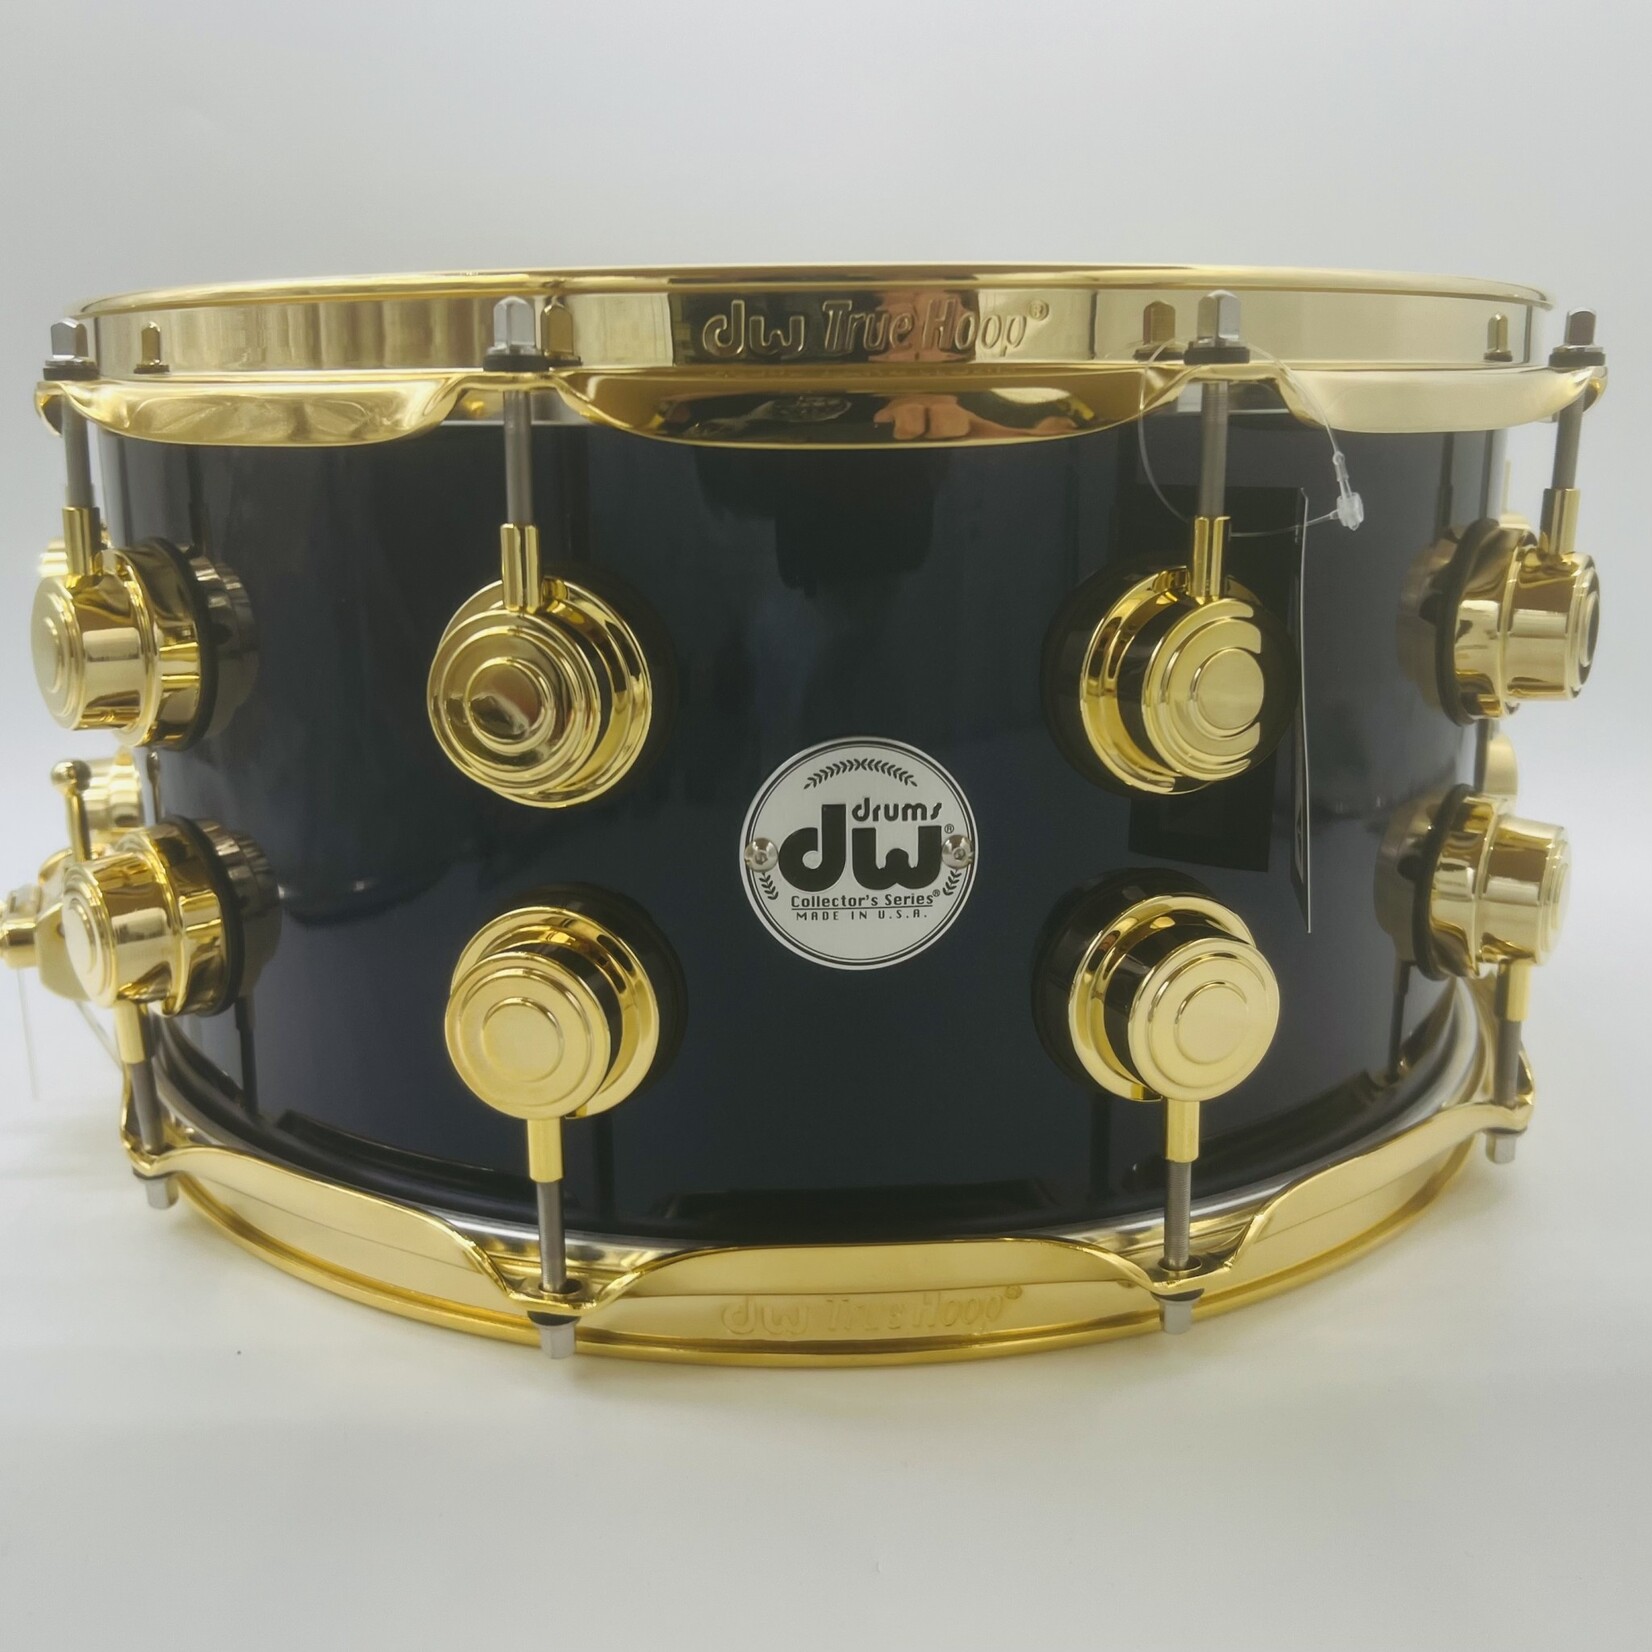 DW DW Collector's Series 7x14" Maple-Mahogany Snare Drum (Solid Black with Purple Pearl Sparkle Lacquer) with Gold Hardware